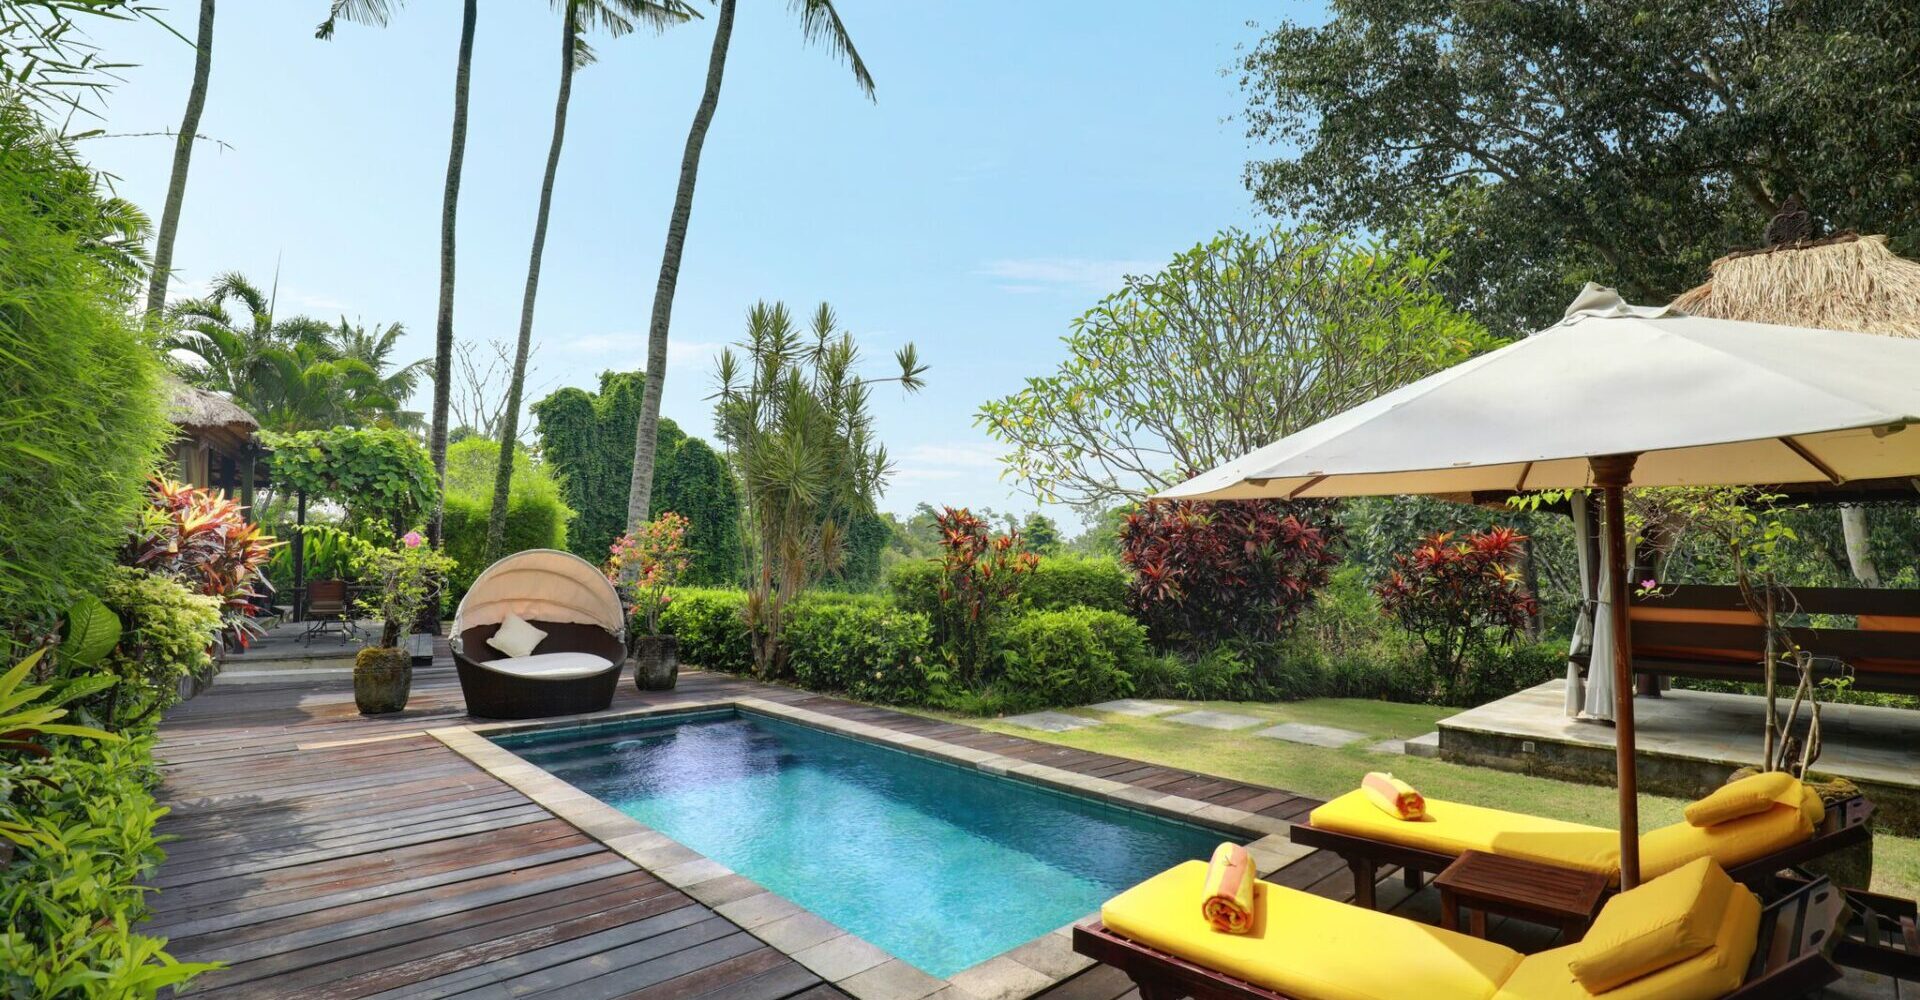 The pool with seating areas of Sukavati's one bedroom private pool villa – 'Amitabha'.